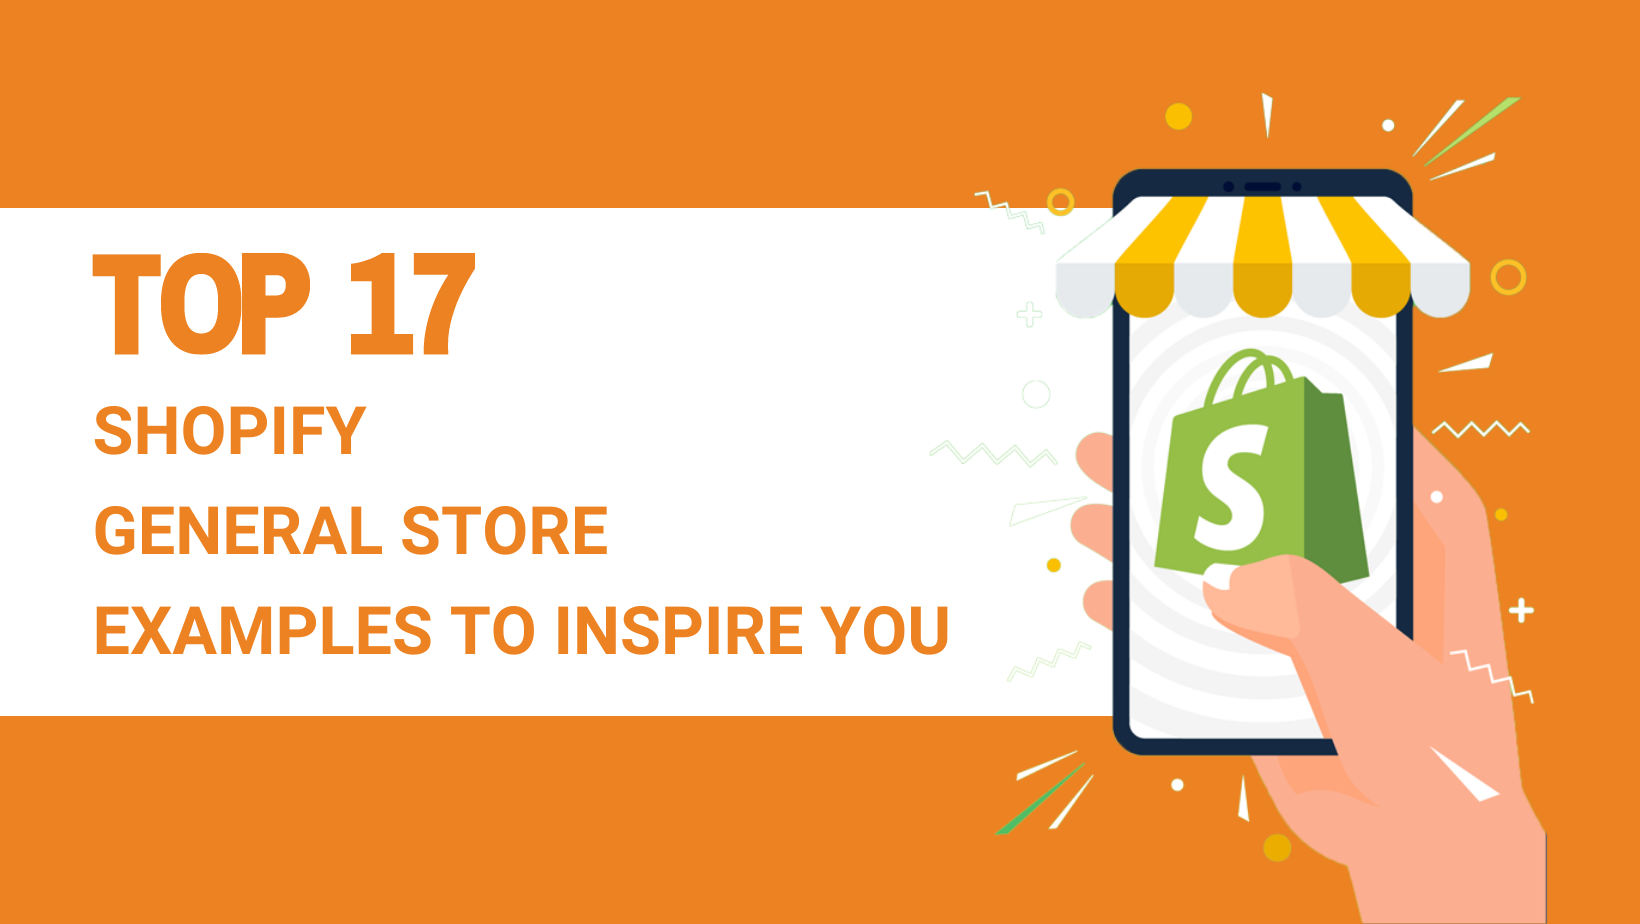 TOP 17 SHOPIFY GENERAL STORE EXAMPLES TO INSPIRE YOU